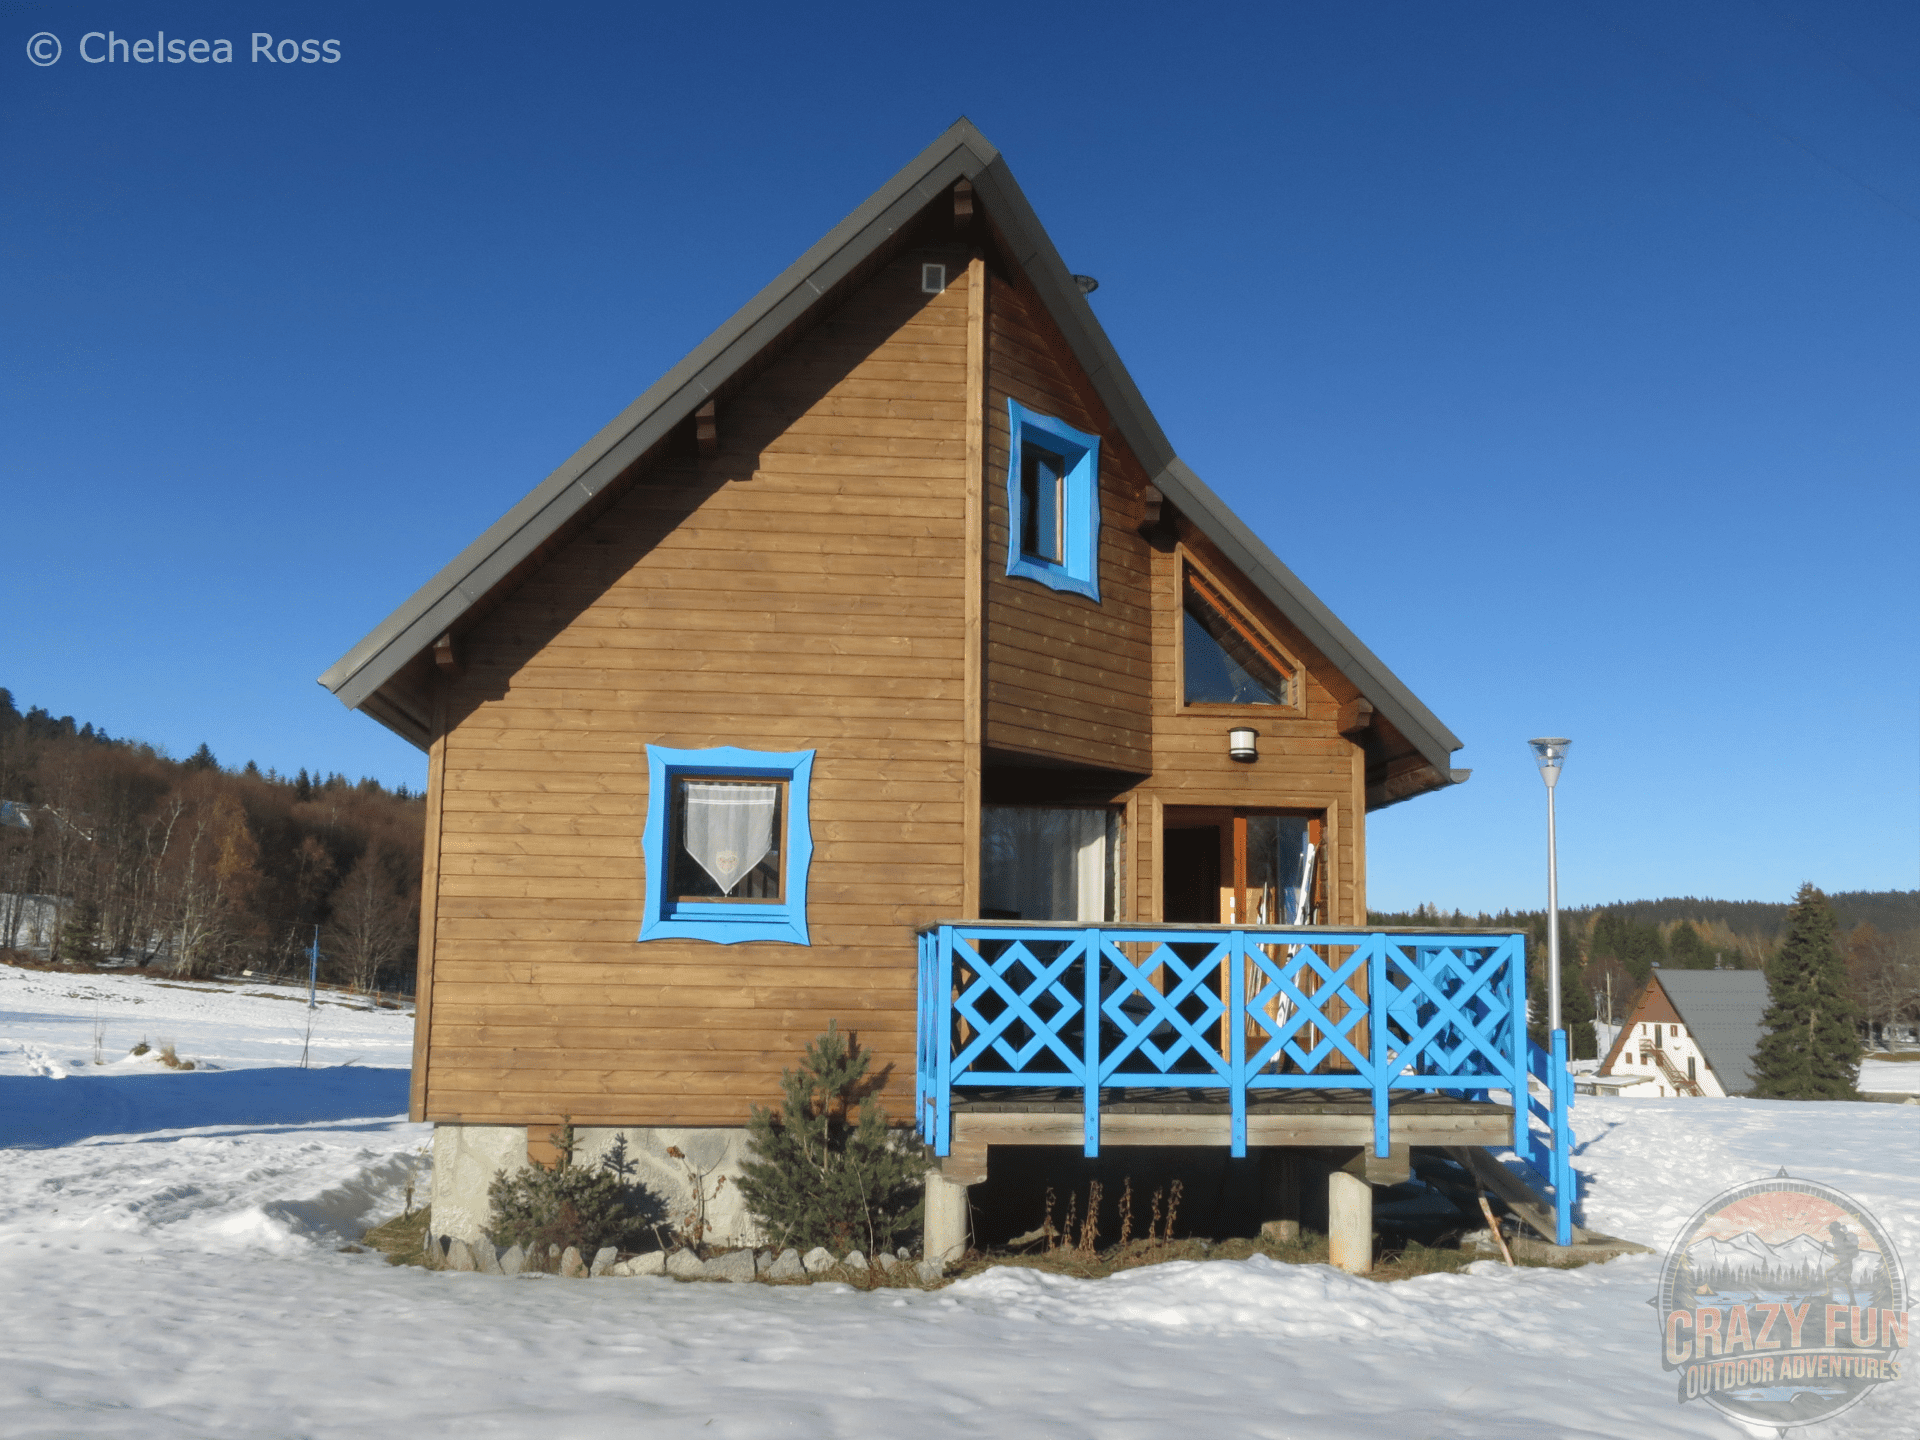 A quaint wooden chalet with blue window sills and blue railings on the patio. It's a gorgeous blue sunny day with snow lying on the ground.